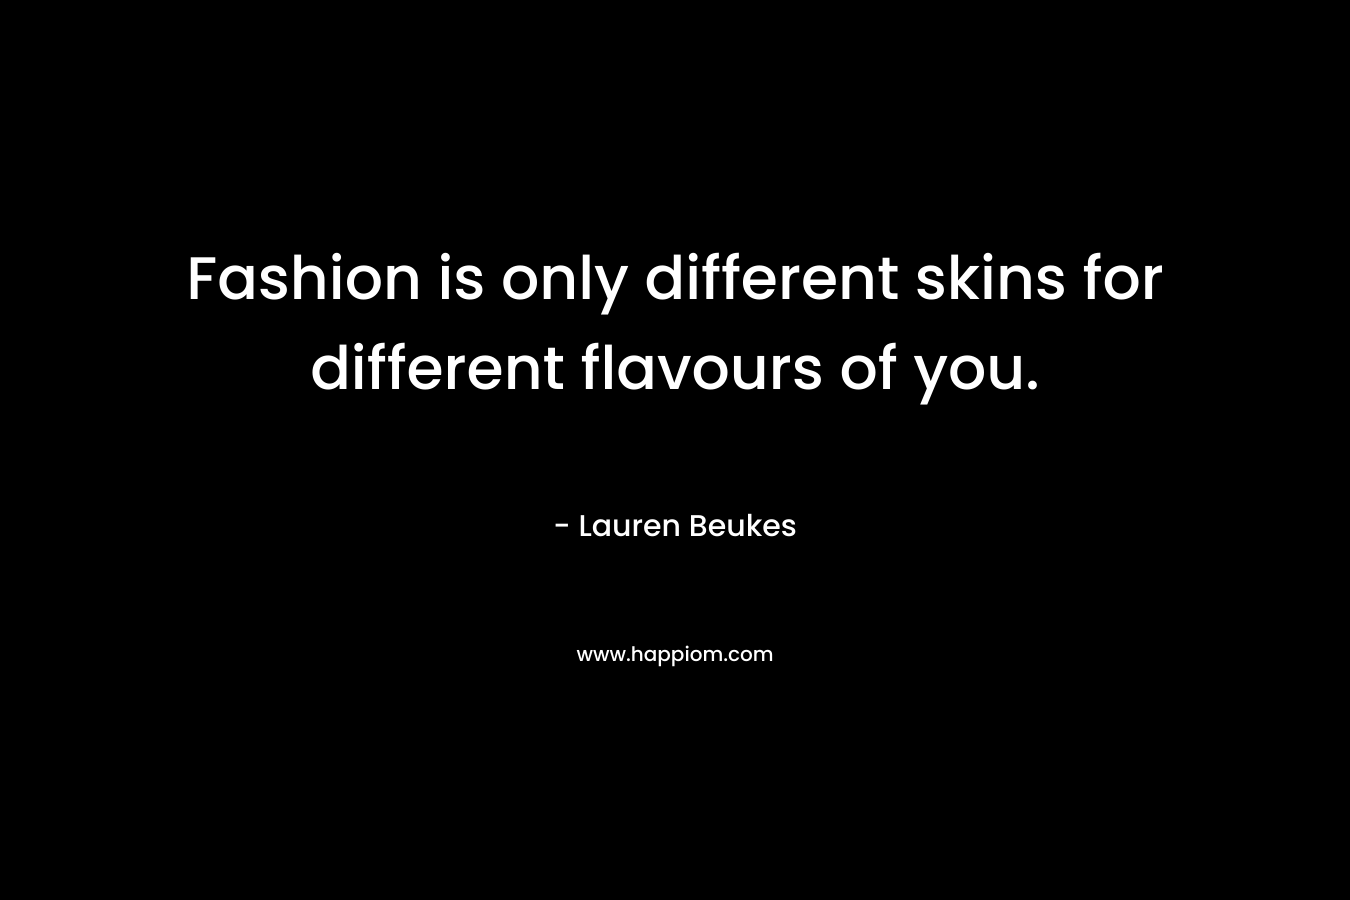 Fashion is only different skins for different flavours of you.